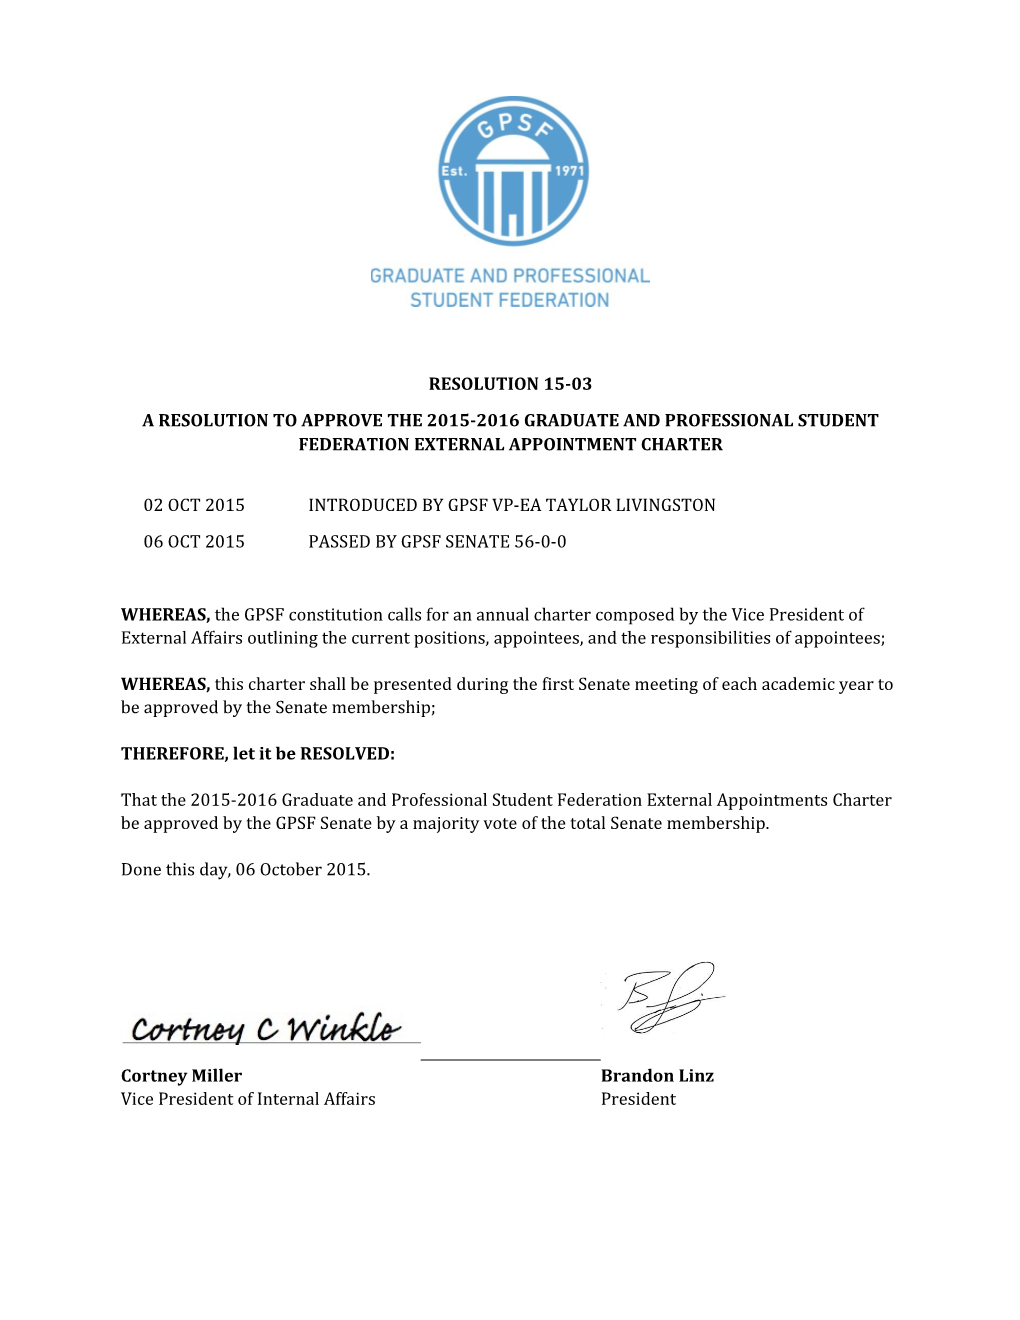 A Resolution to Approve the 2015-2016 Graduate and Professional Student Federation External